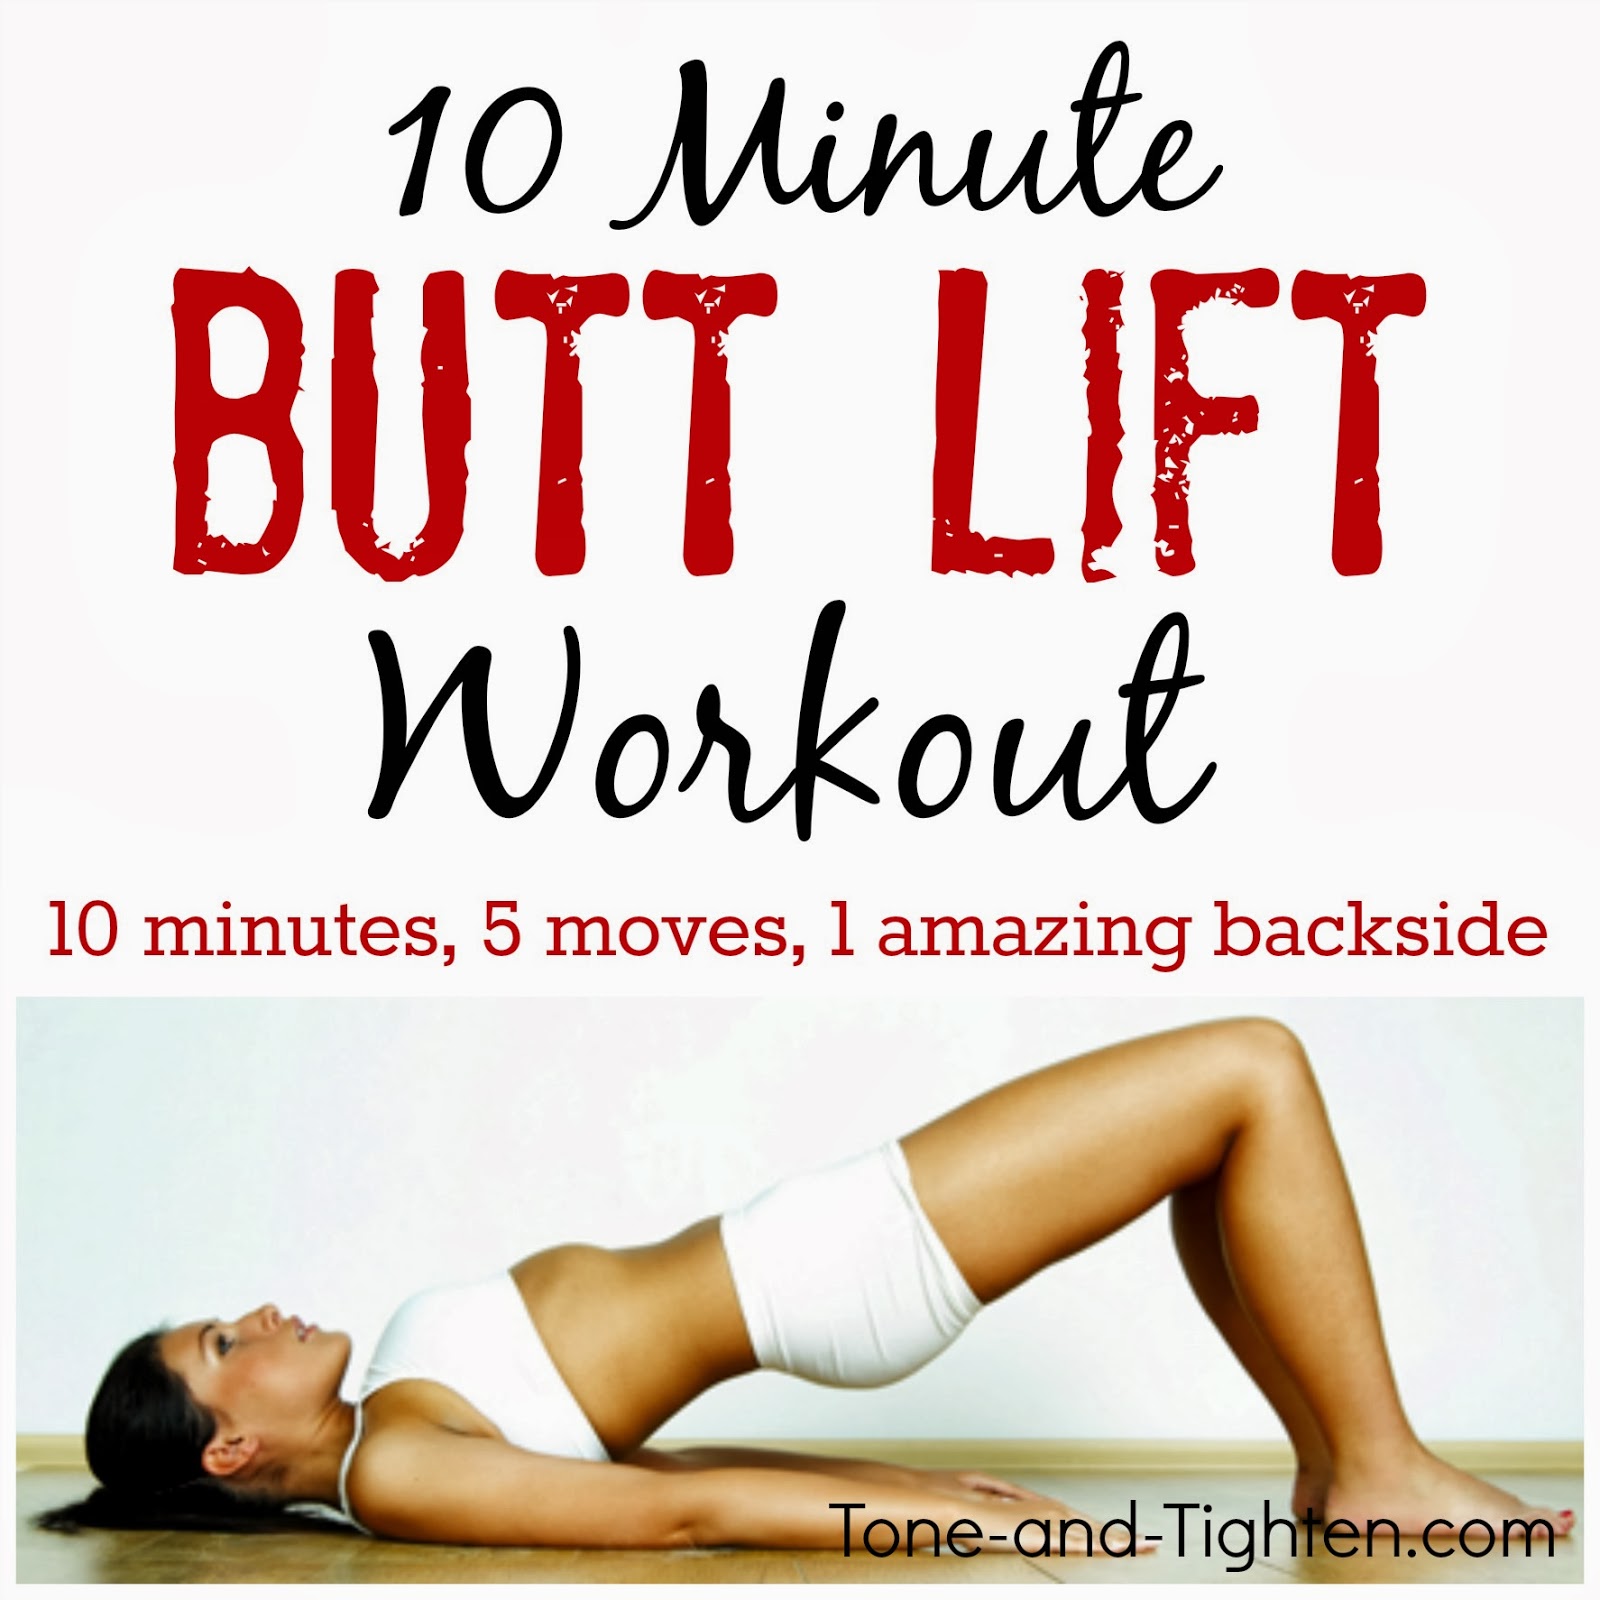 Exercises To Lift Butt 30